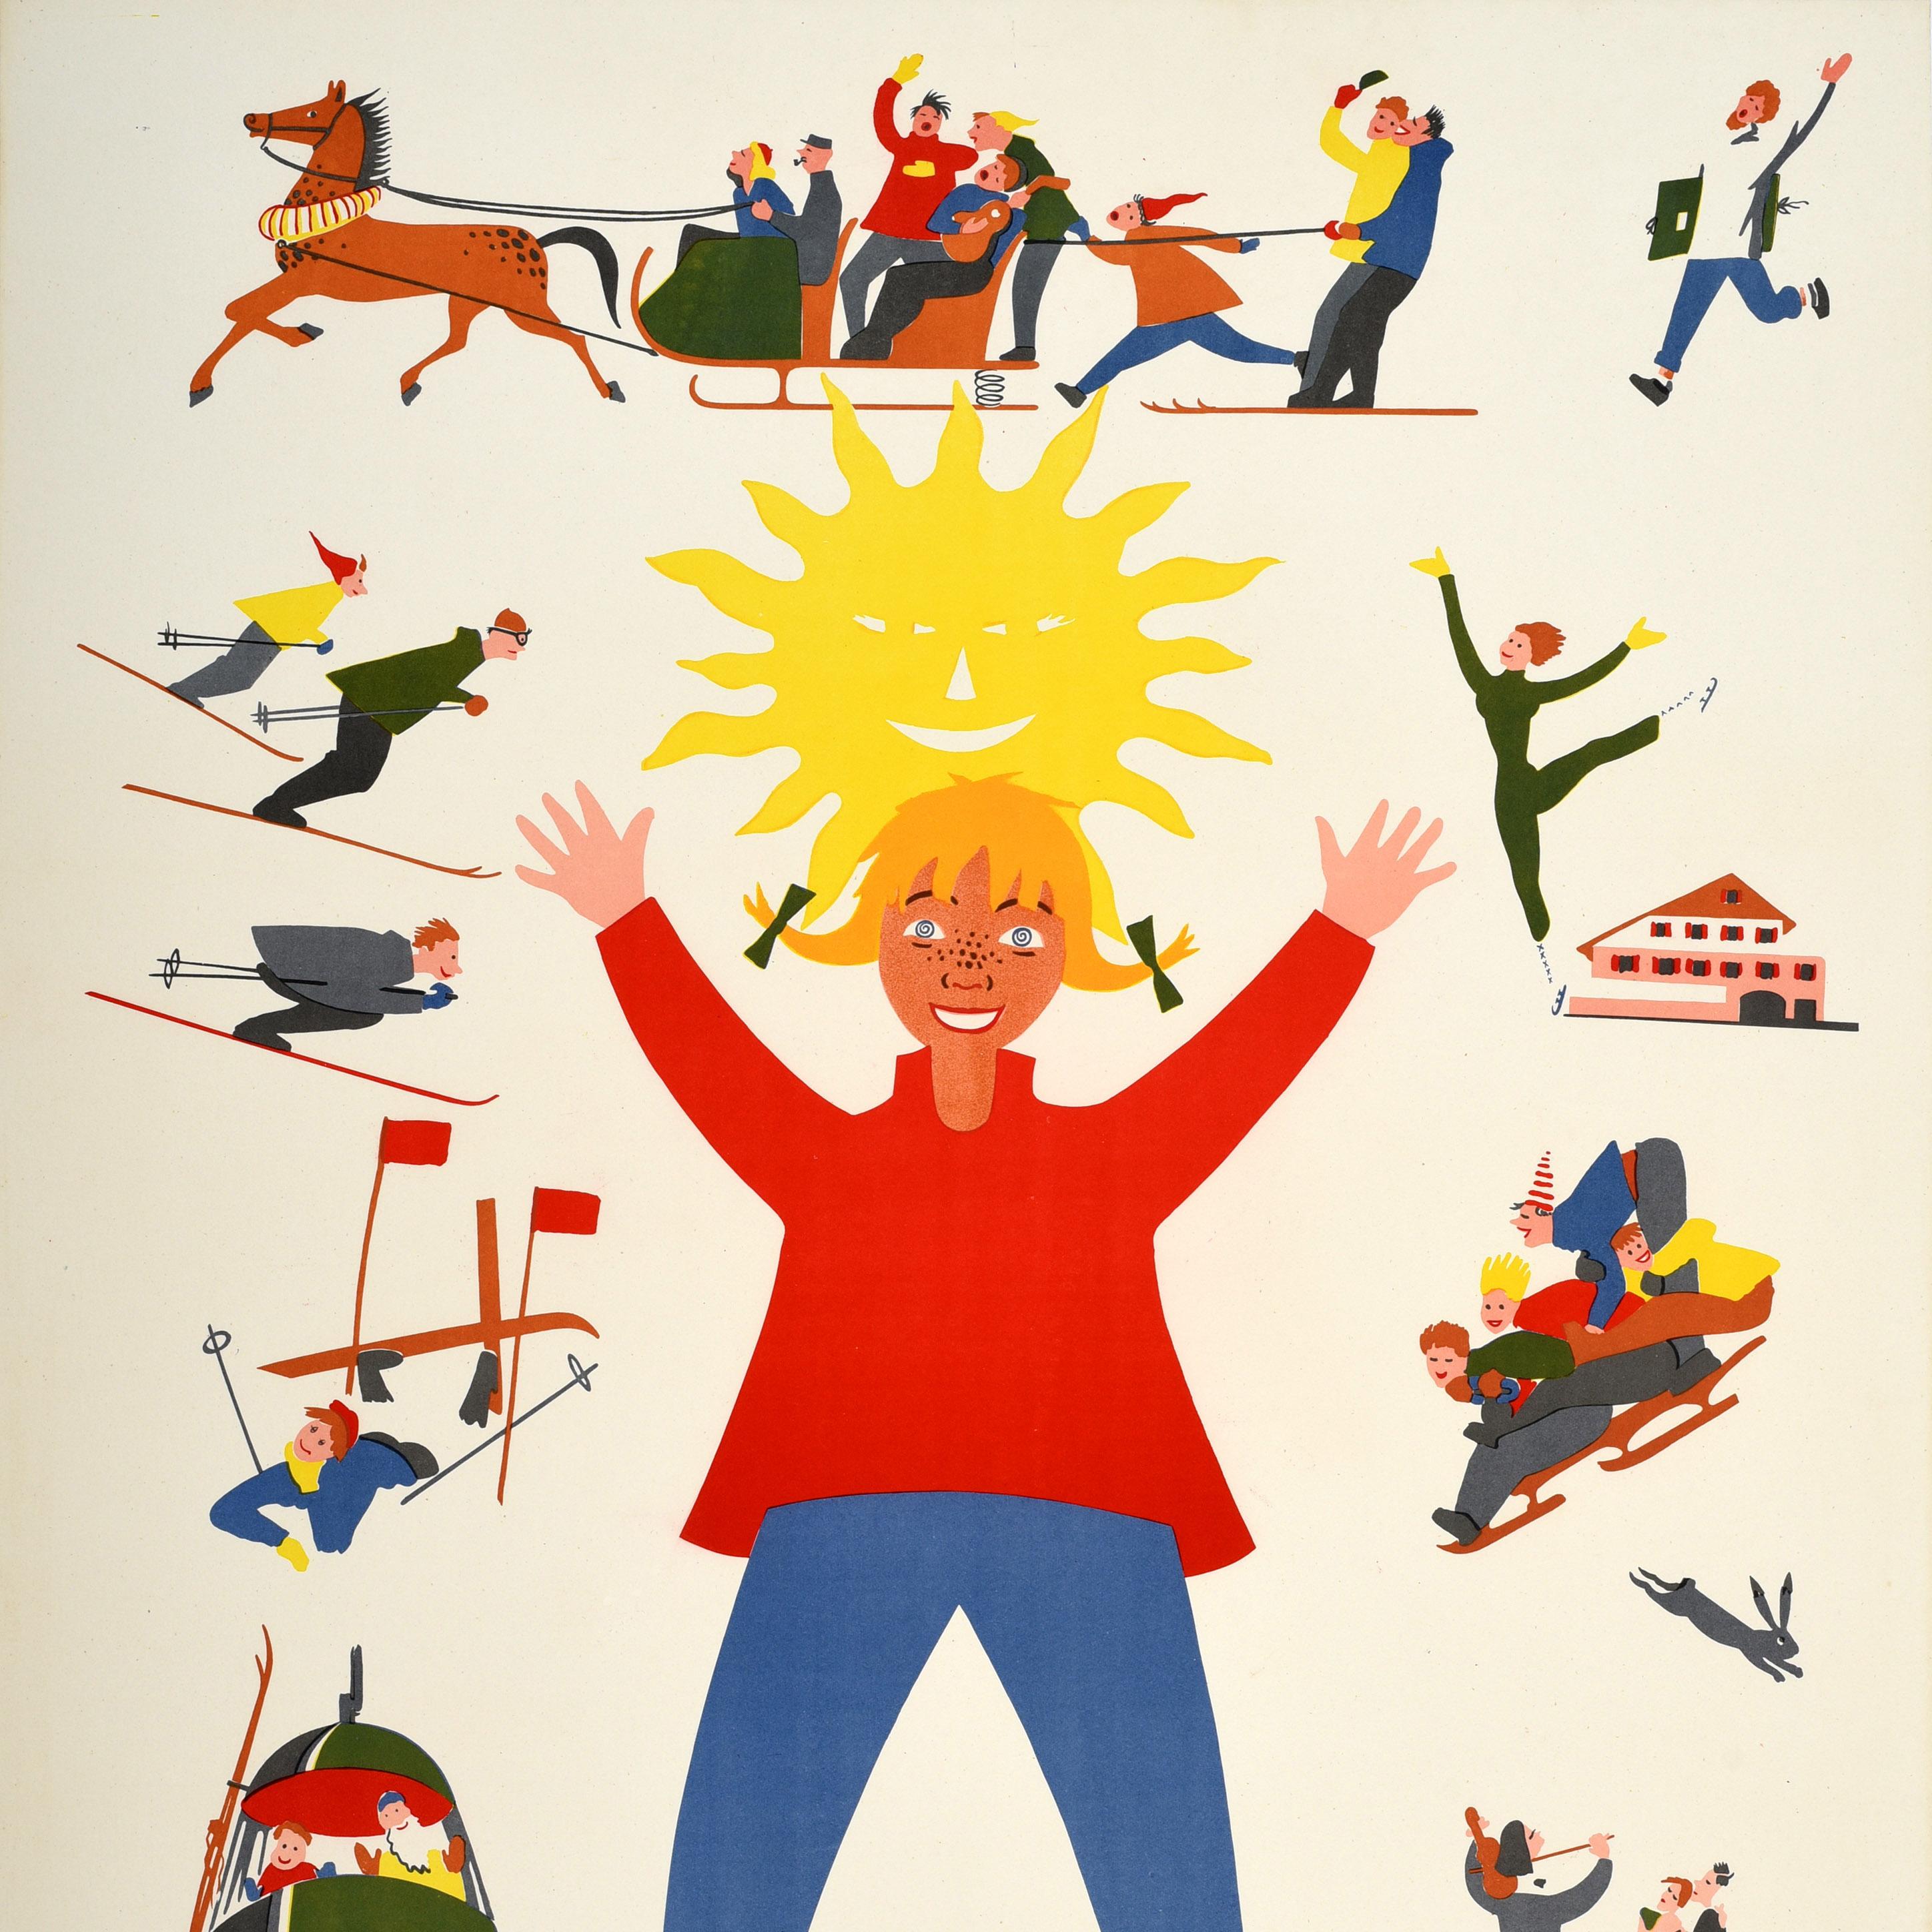 Original vintage ski poster for Supermolina in the Catalan Pyrenees in Spain / Pirineos Catalanes Espana alt 1700-2537m featuring a smiling girl holding up her arms in joy surrounded by colourful and fun winter sport illustrations including holiday